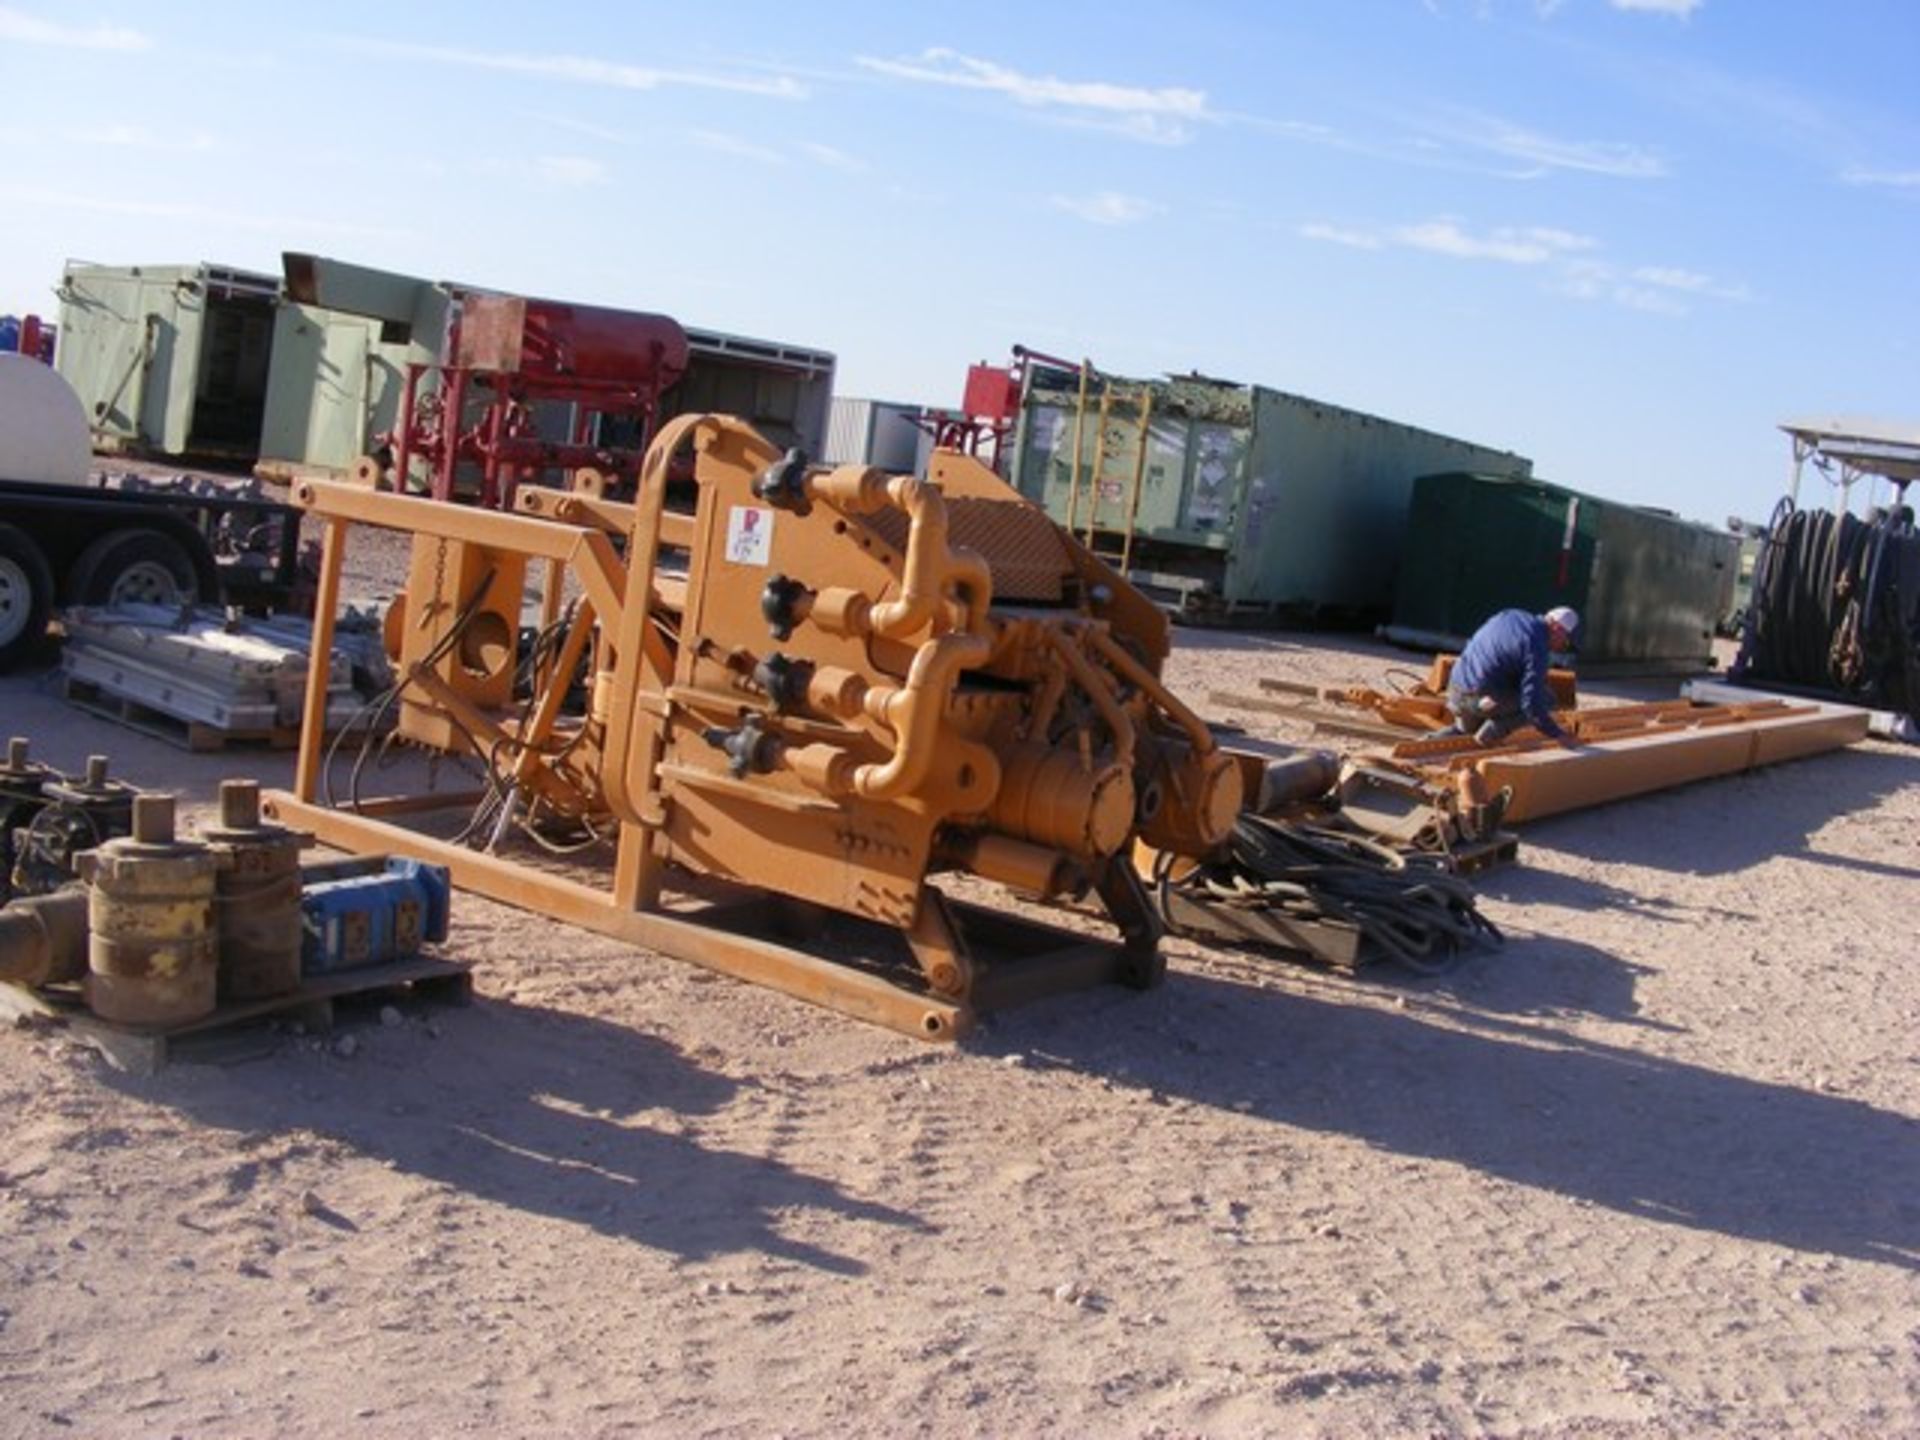 "Located in YARD 1 - Midland, TX TESCO 500 TON ECI (S) 900HP HYDRAULIC TOP DRIVE PACKAGE TO